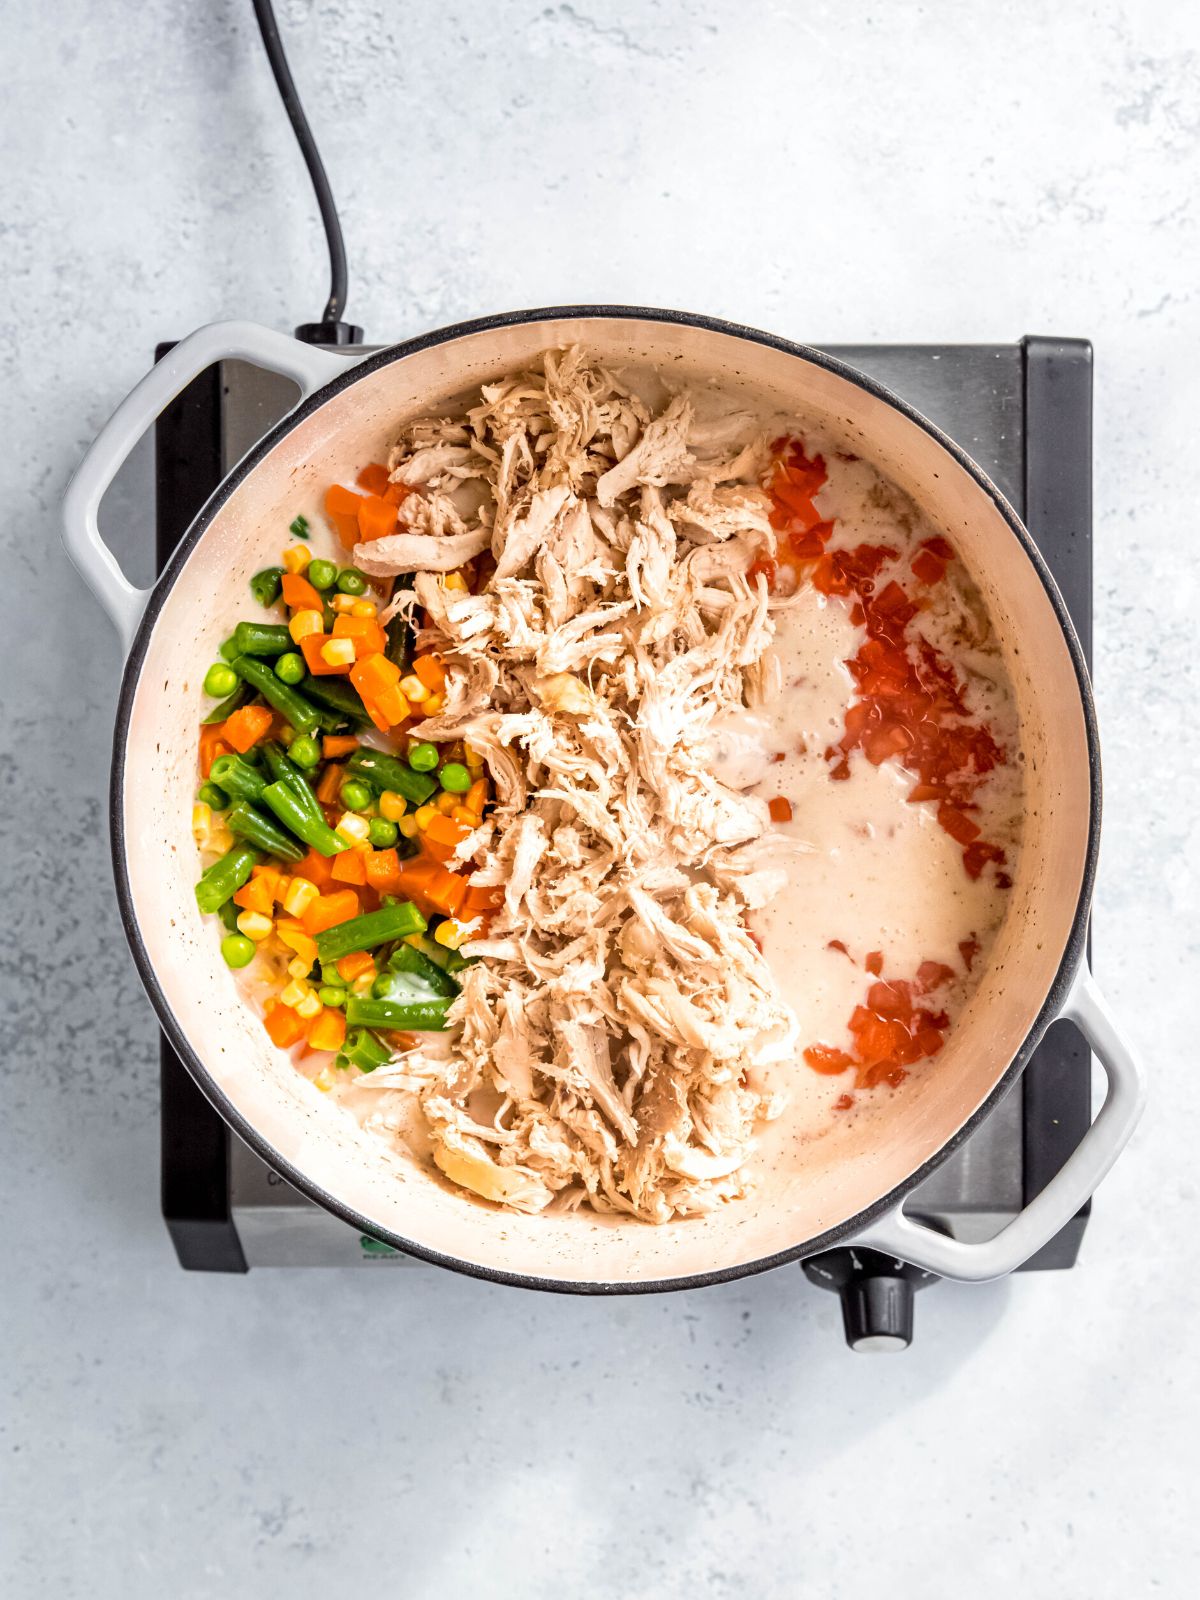 shredded chicken, mixed veggies, and pimentos added to the dutch oven with the creamy white sauce.